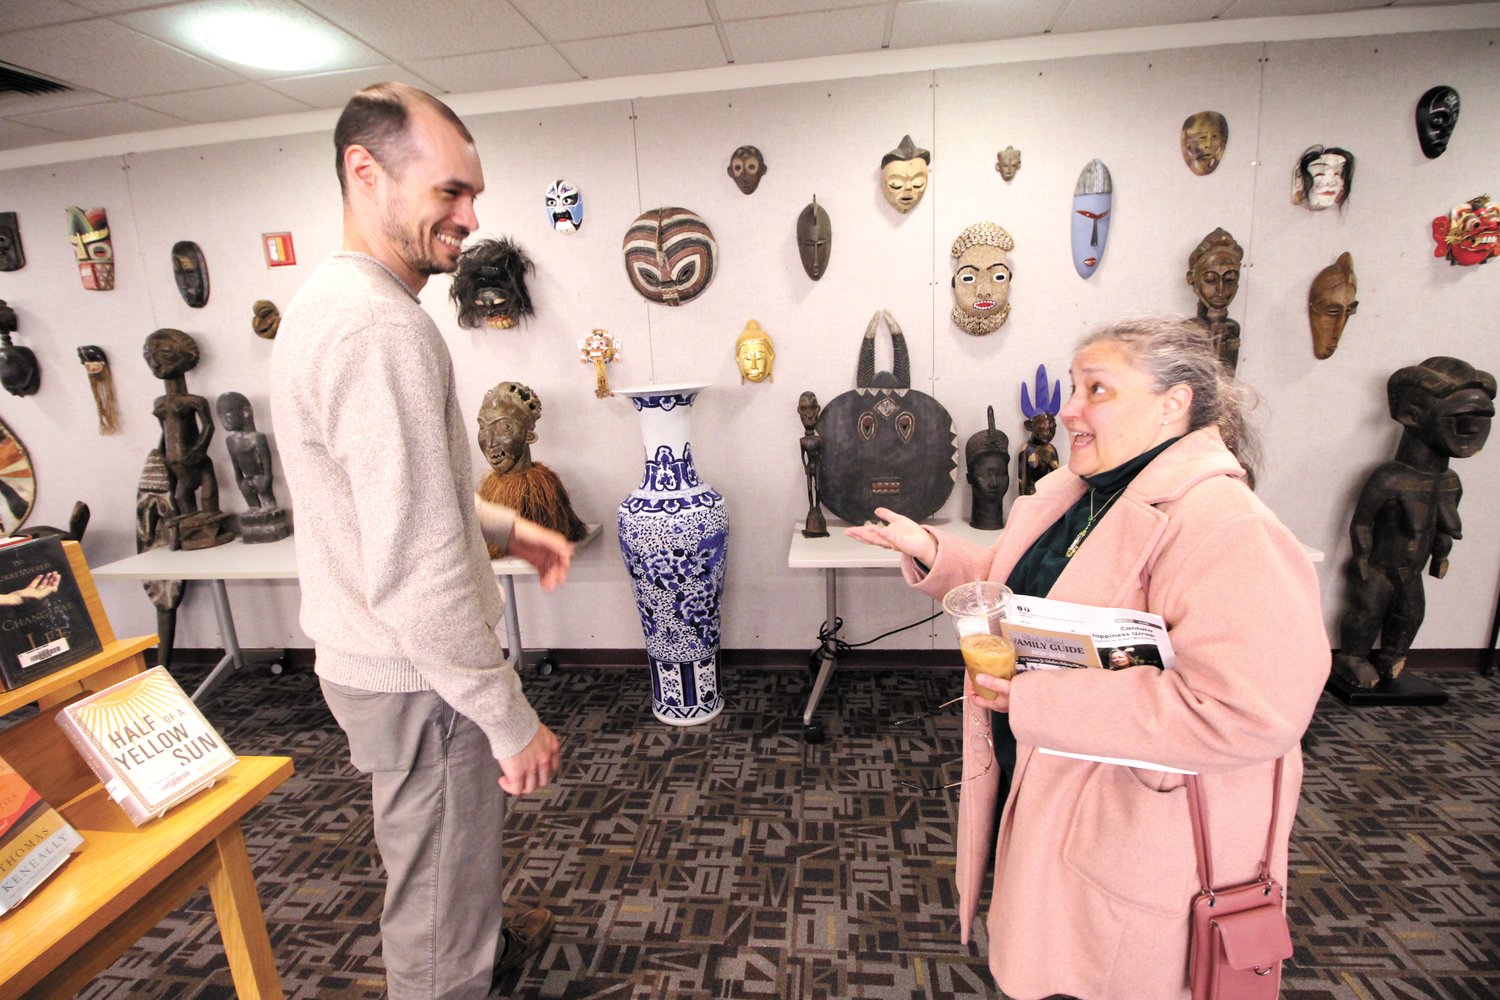 COMPARING NOTES: Justin Bibee talks with Mary Tramonti who stopped to look at the display of masks and figurines on display at the Warwick Public Library. Tramonti, who lived in Ethiopia, compared notes on living in Africa.